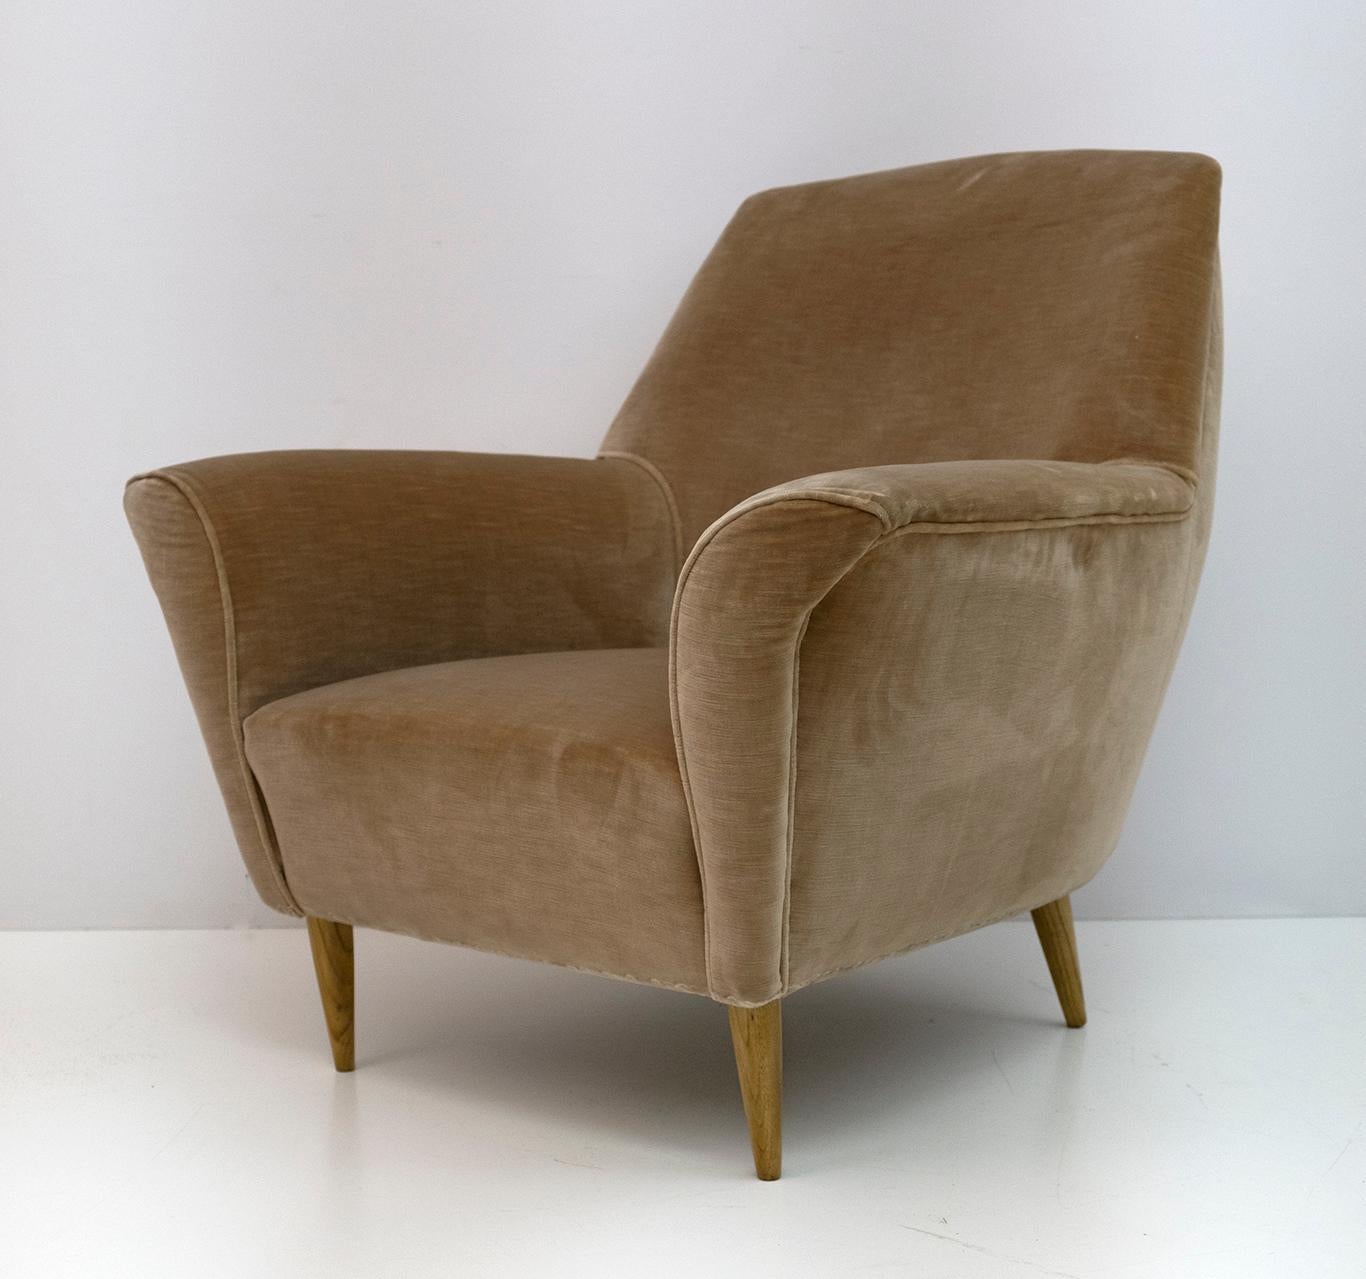 Pair of Ico Parisi Mid-Century Modern Curved Armchairs for Ariberto Colombo, 50s 1